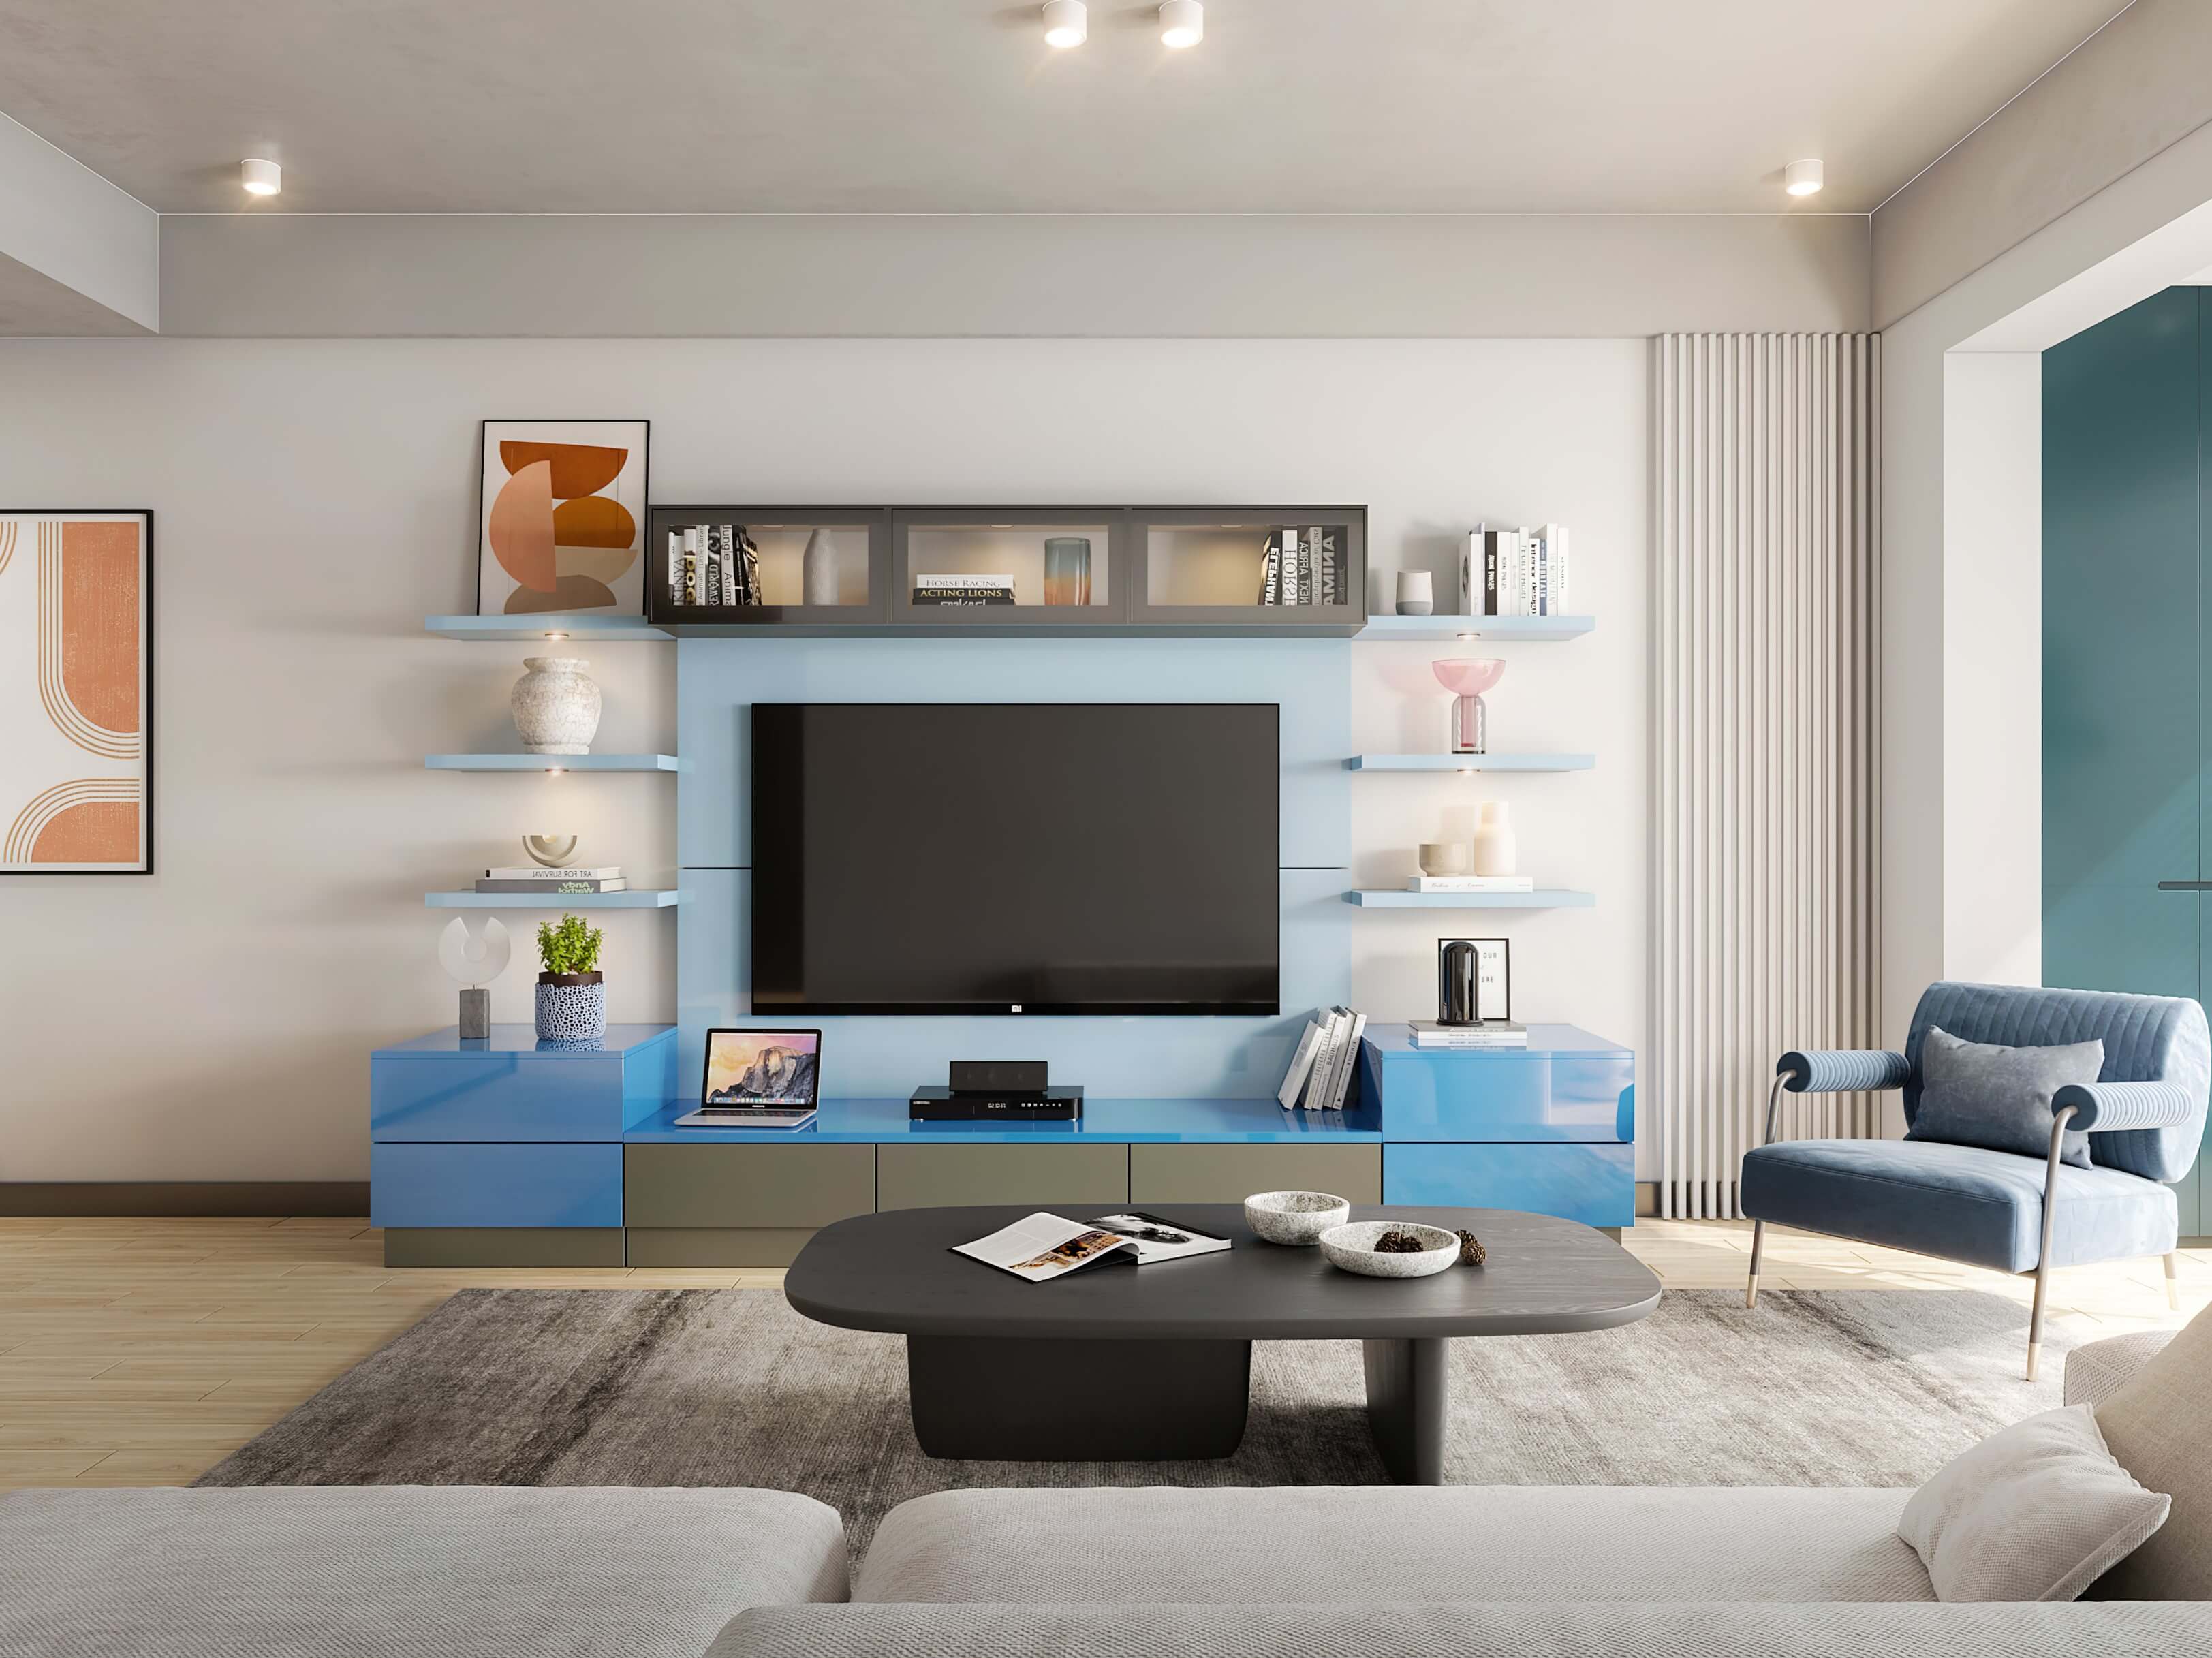 Minimal living room design with blue & grey tv unit ideas for your home - Beautiful Homes